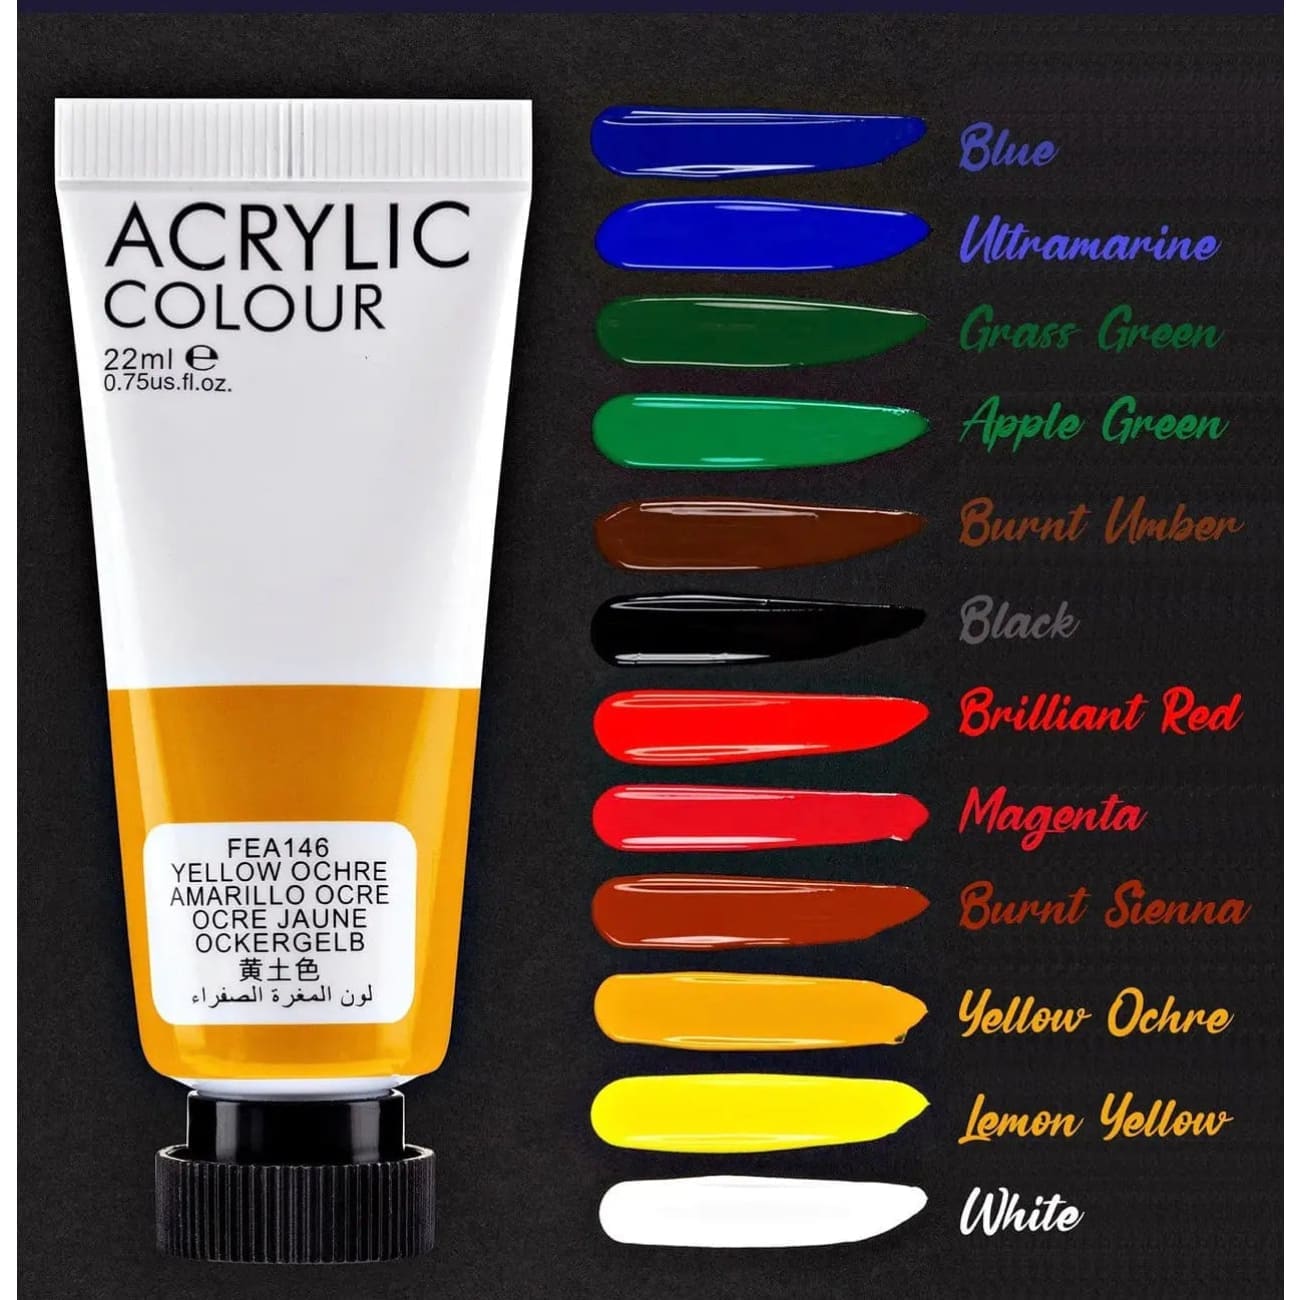 ACRYLIC PAINT - 12 Highly Pigmented Acrylic Colors Rock Chocs 